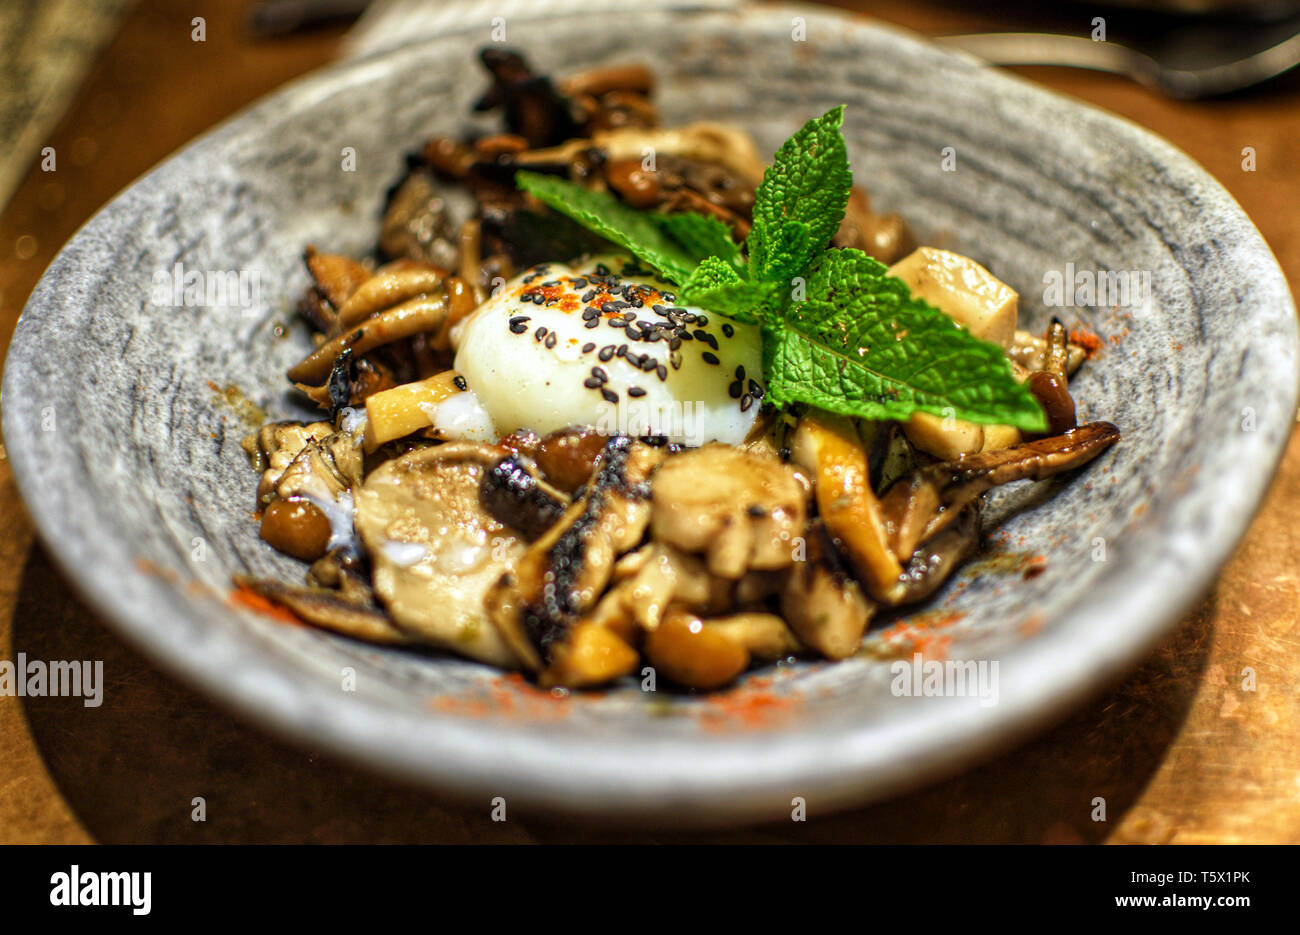 A bowl of mushrooms and fungi with an egg cooked at low temperature. Modern cuisine in Spain 2019. Low tempered egg with mushroom,  toadstool served with a mint leaf. Stock Photo